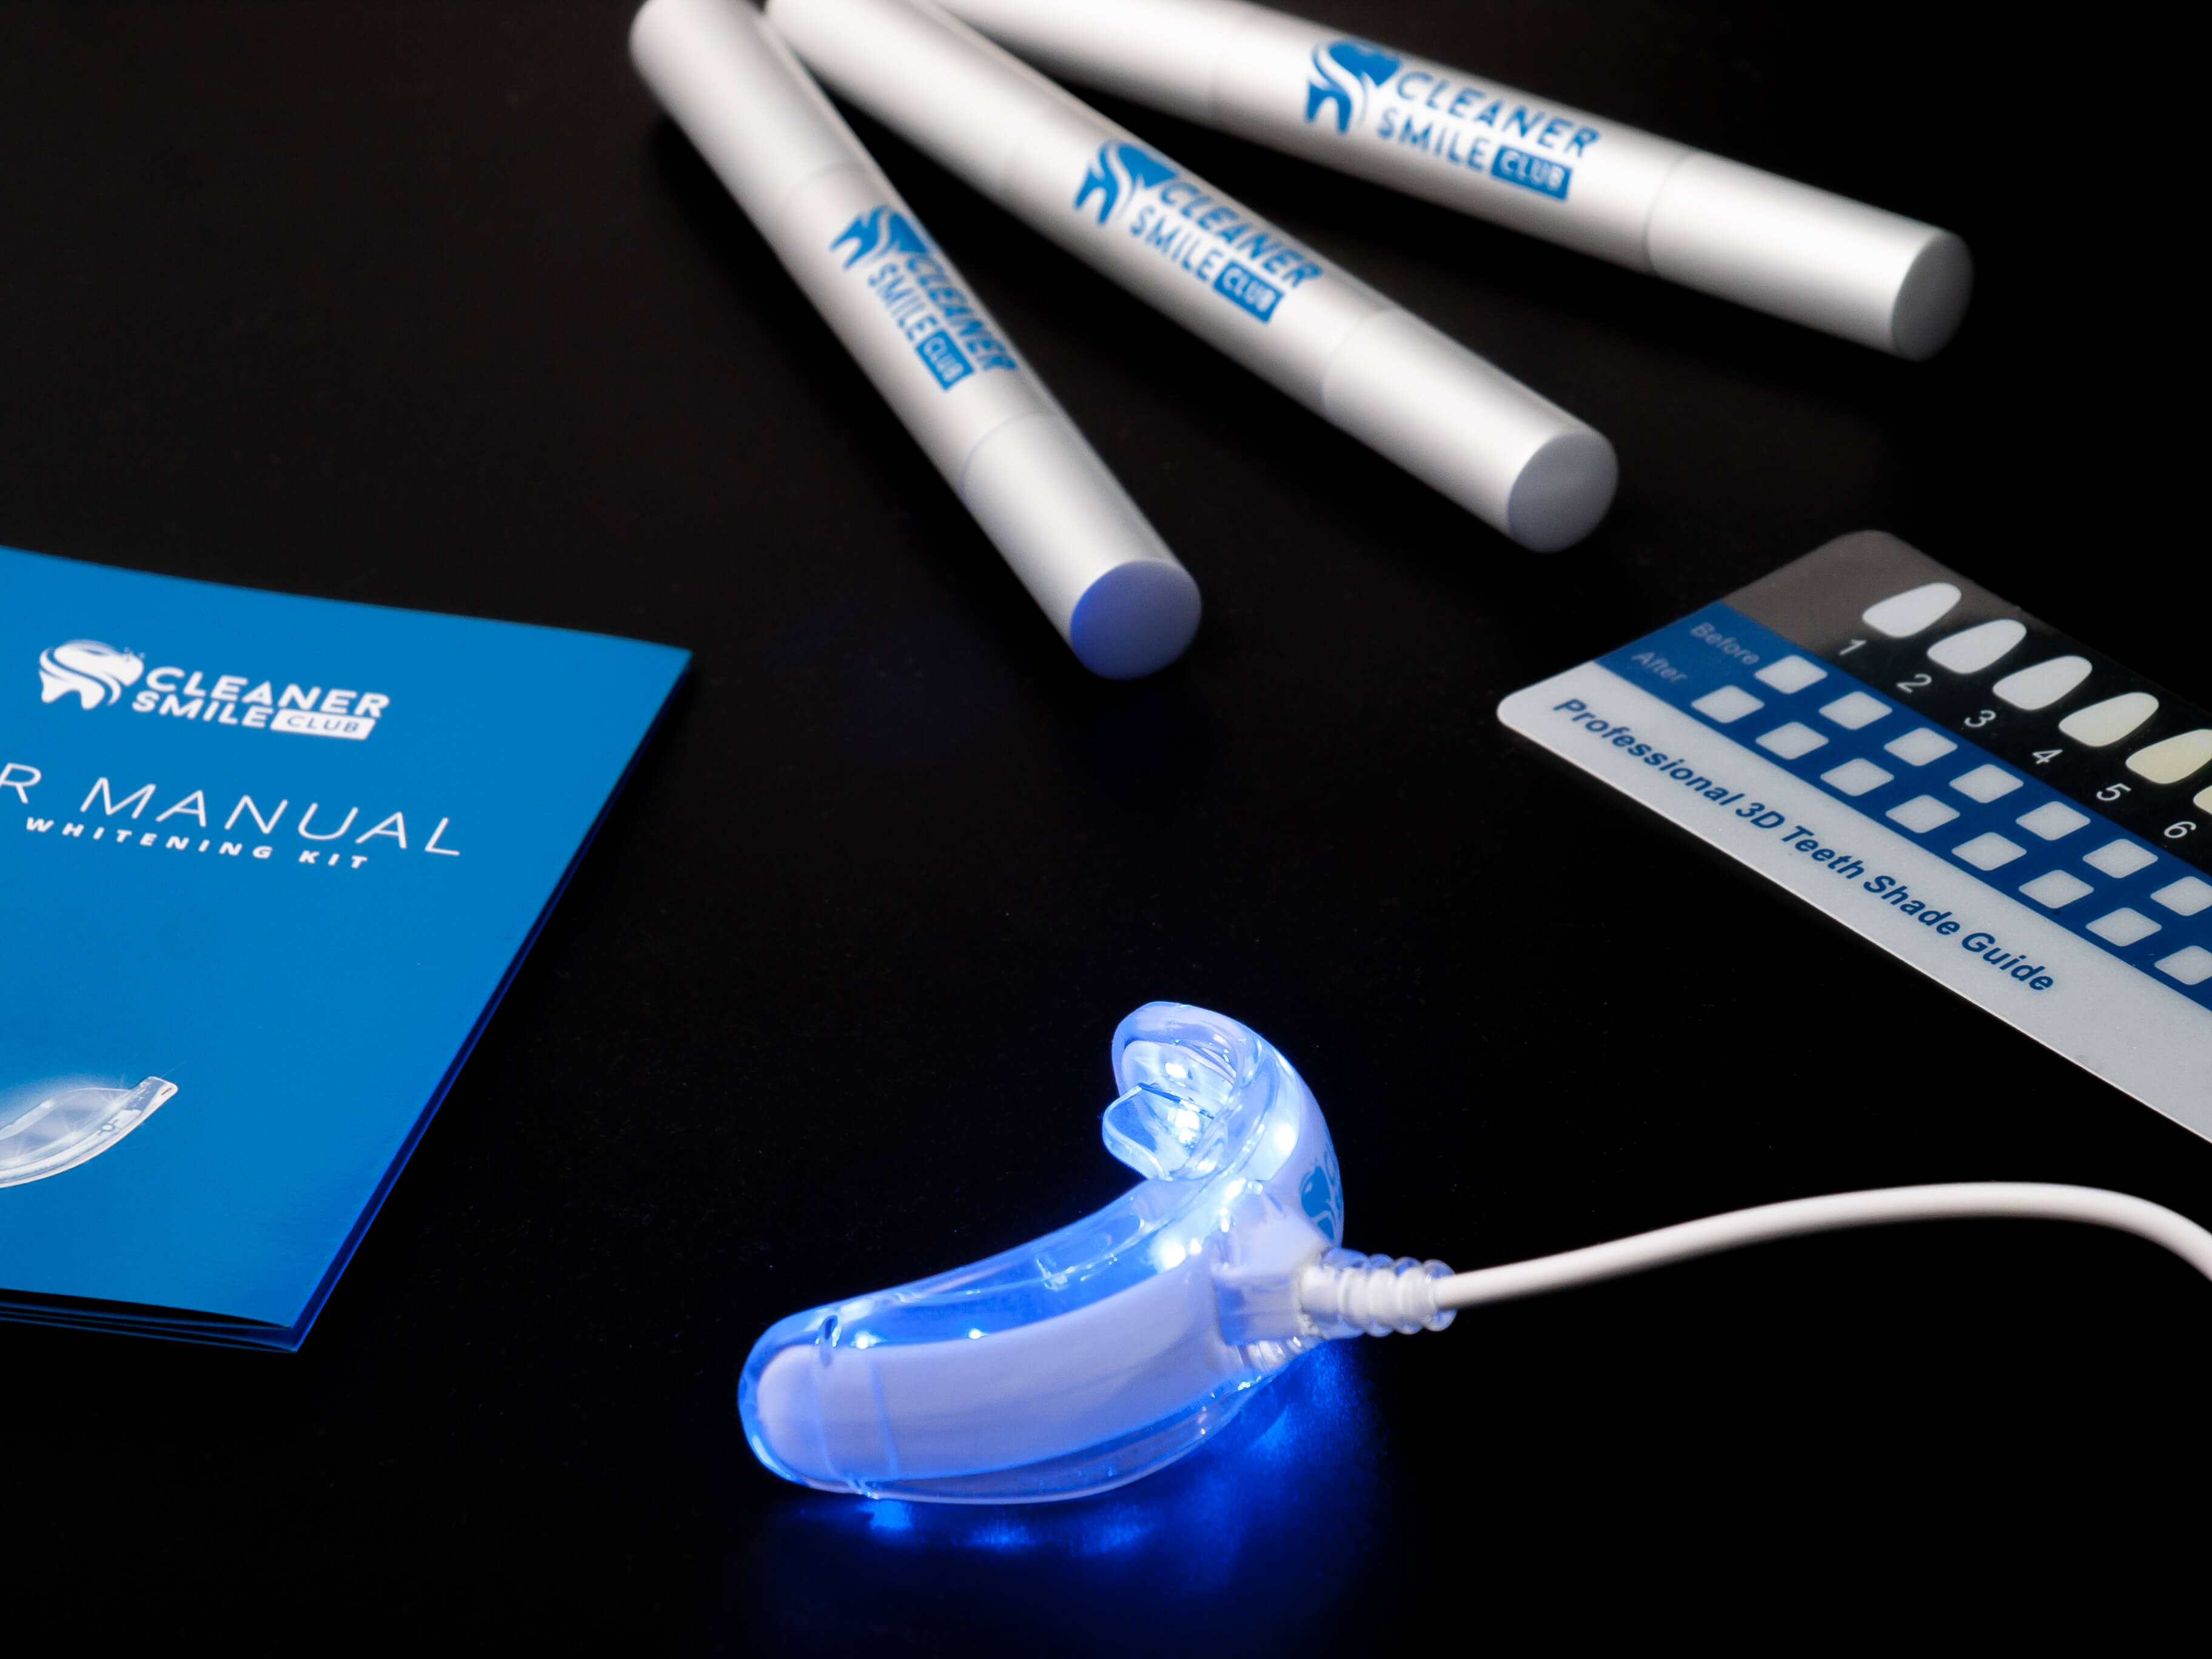 Effective teeth whitening kit from Cleaner Smile Club that consist from whitening pen, blue manual, stripe and LED mouth piece on the black background still photography production made by Fantastic Imago Branding, Advertising and Consulting Agency